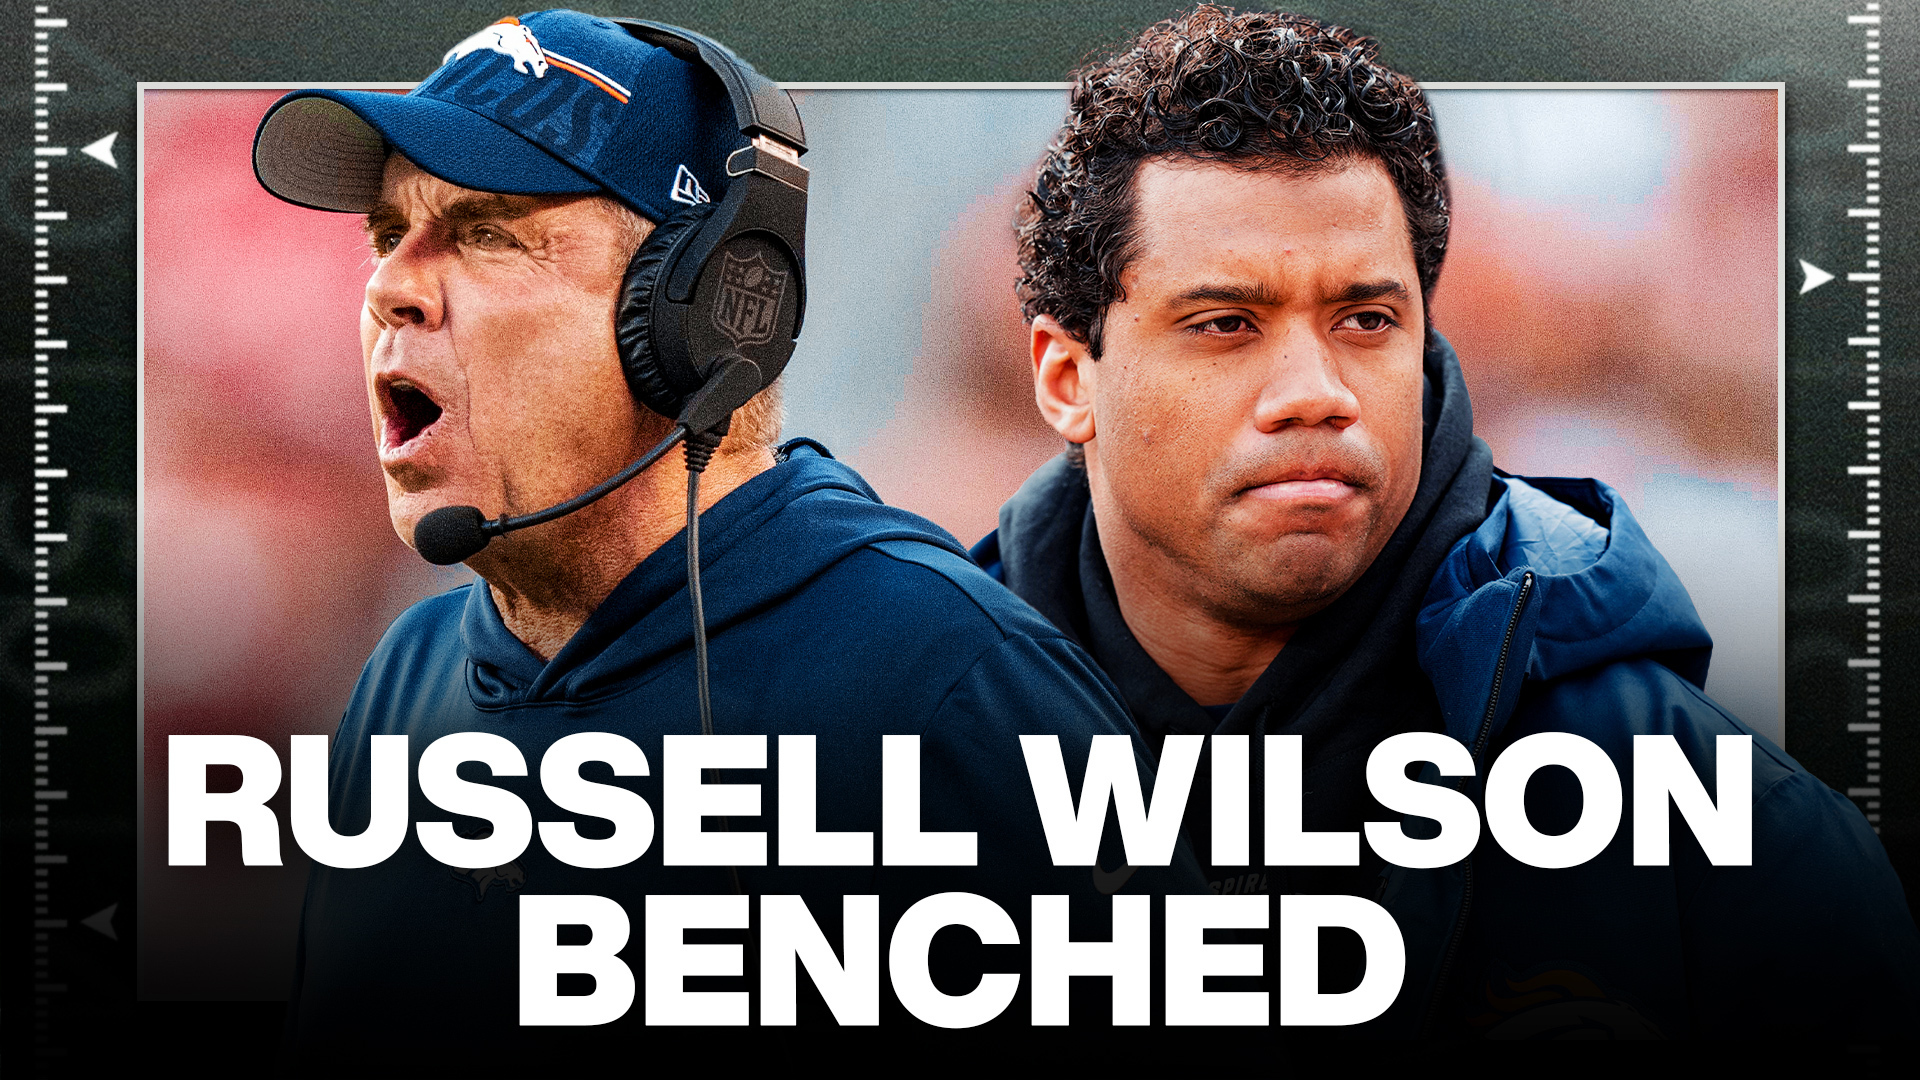 Screen grab of Sean Payton on the left and Russell Wilson on the right with text reading "Russell Wilson benched"